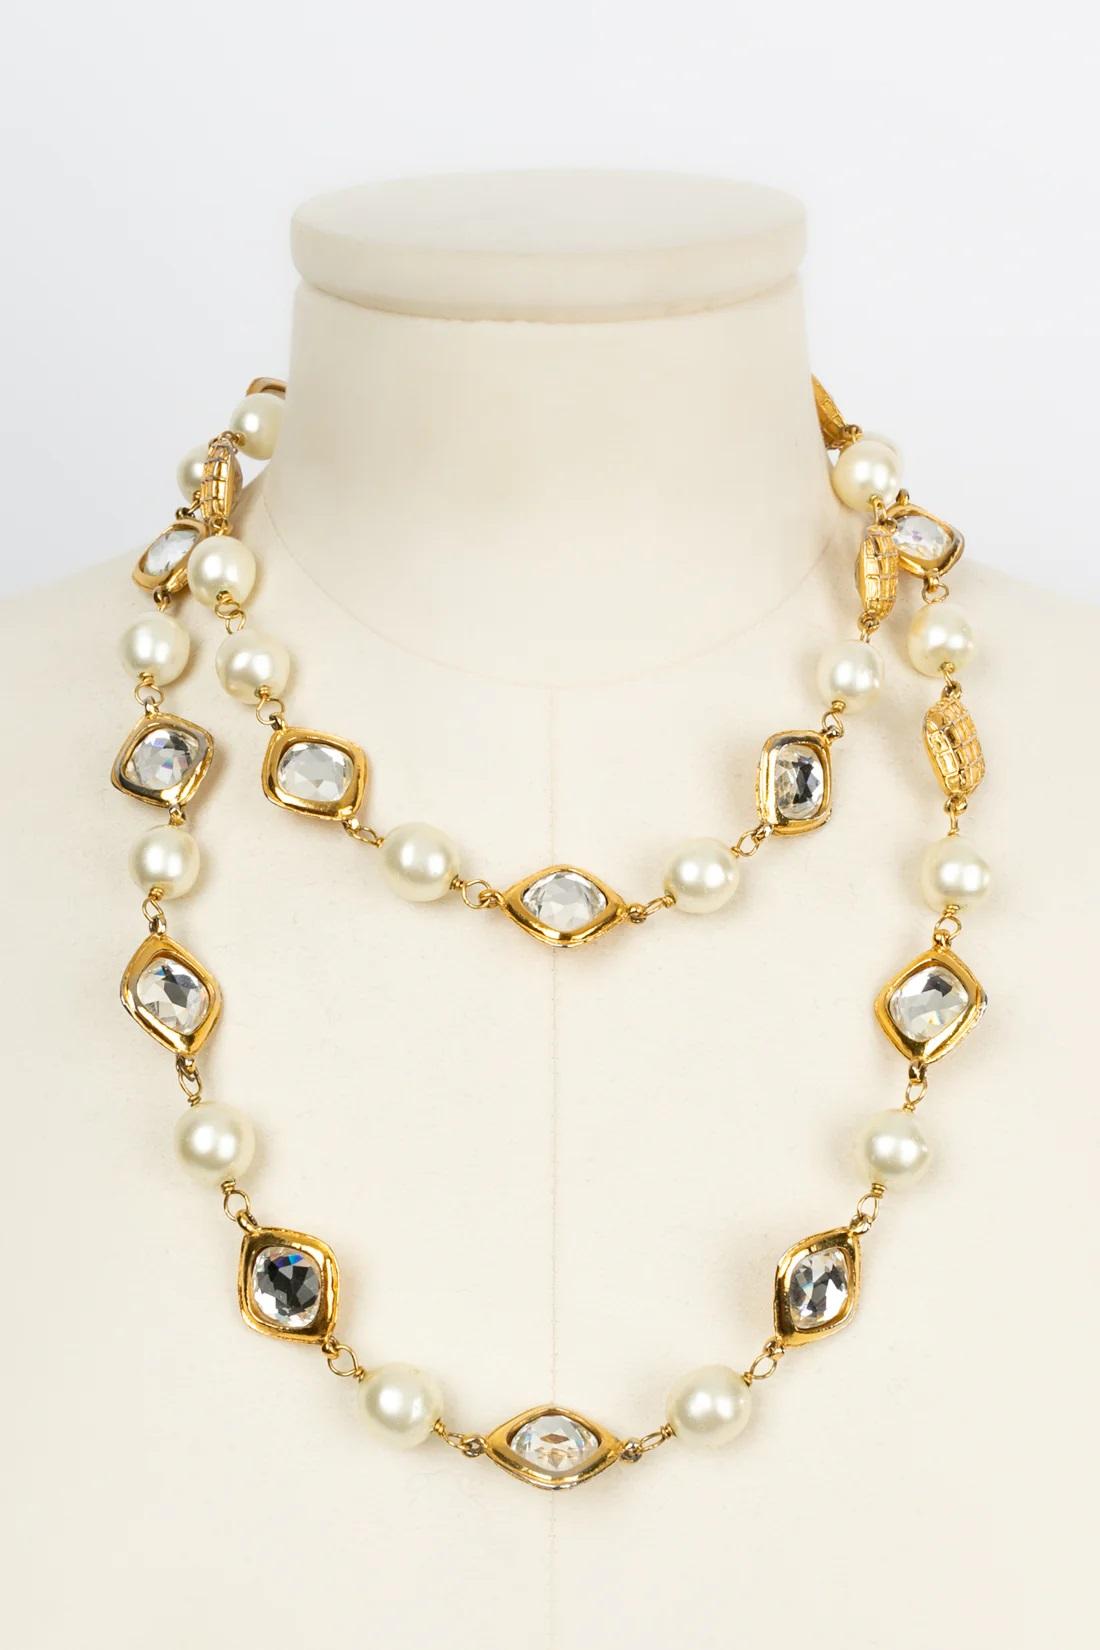 Chanel Beads and Rhinestones Necklace and Clip-on Earrings Set 12